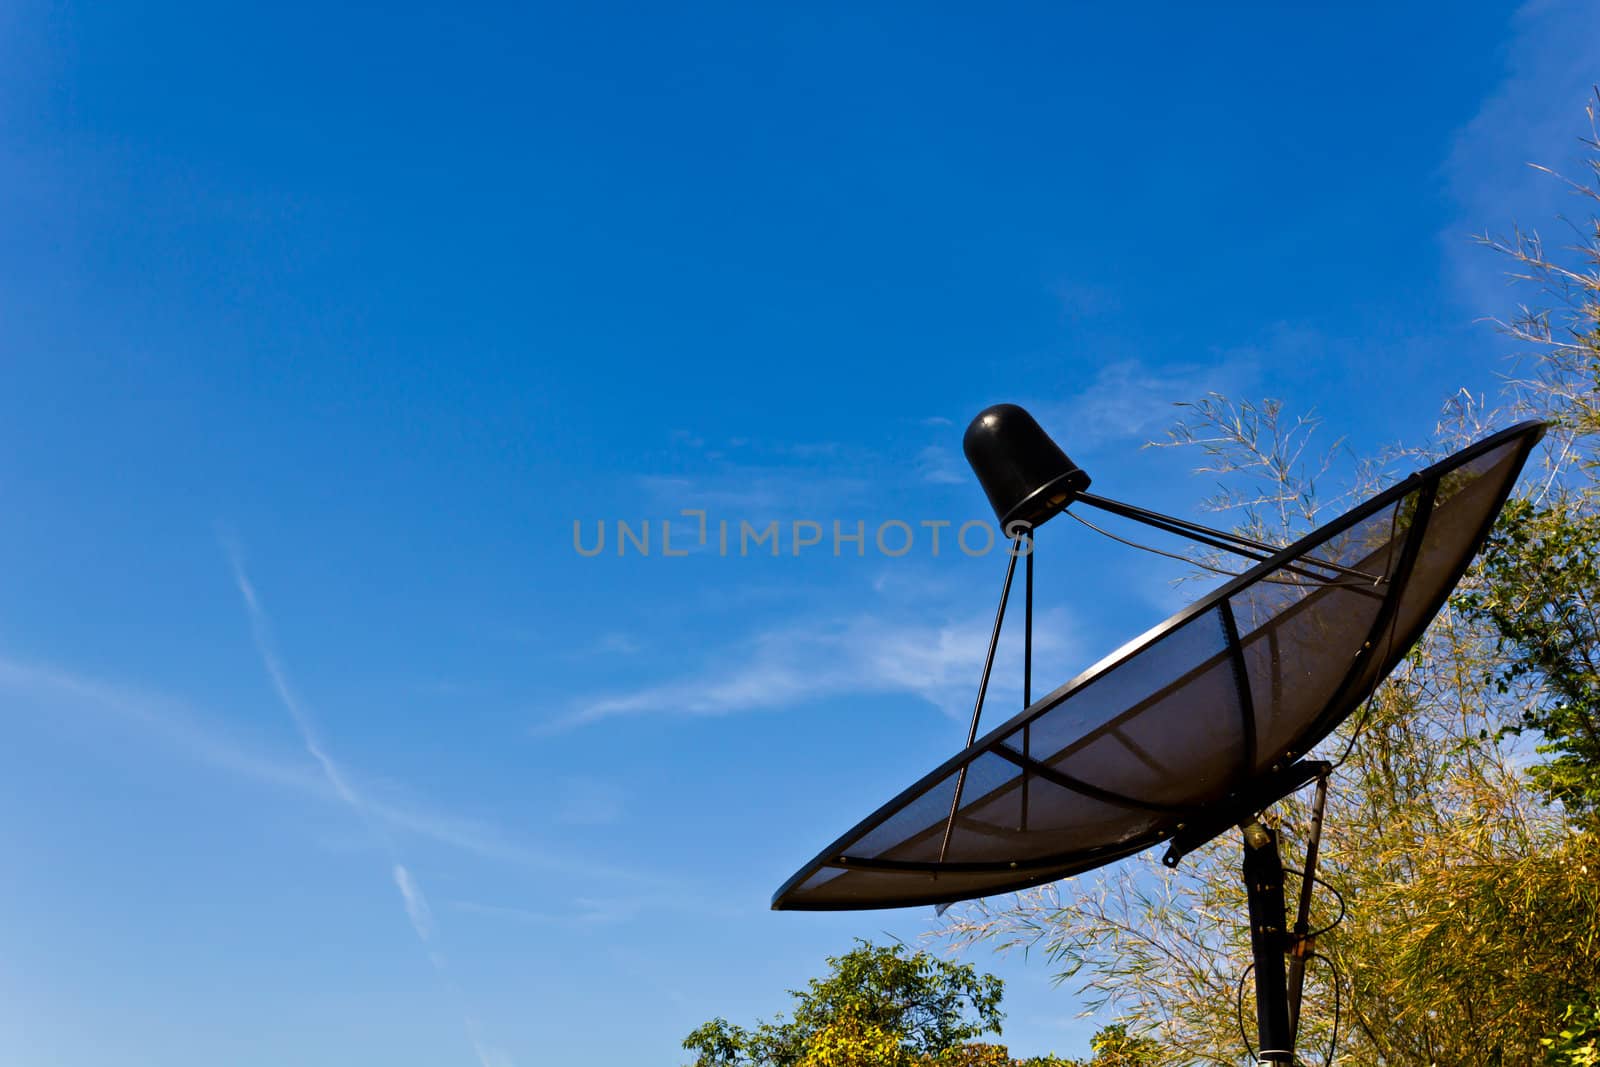 Black Satellite information signals by lavoview